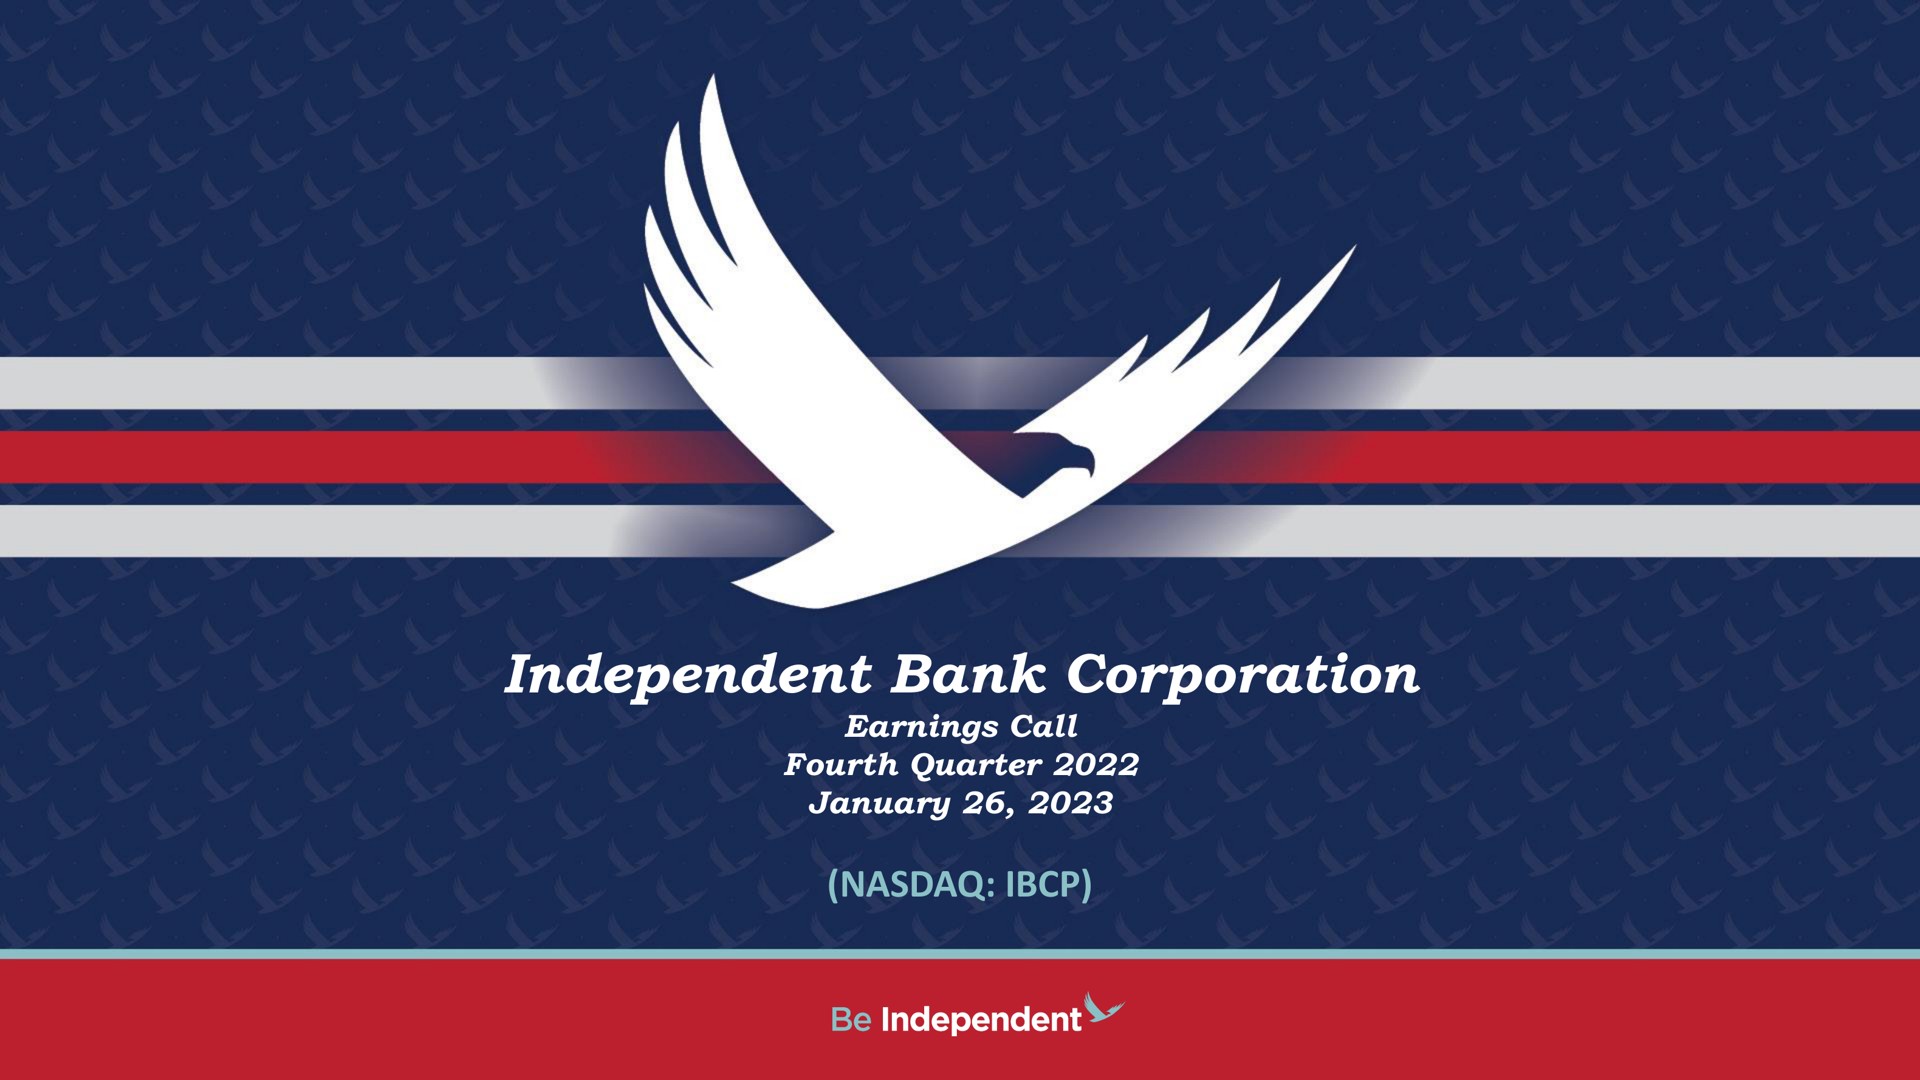 independent bank corporation earnings call fourth quarter be | Independent Bank Corp